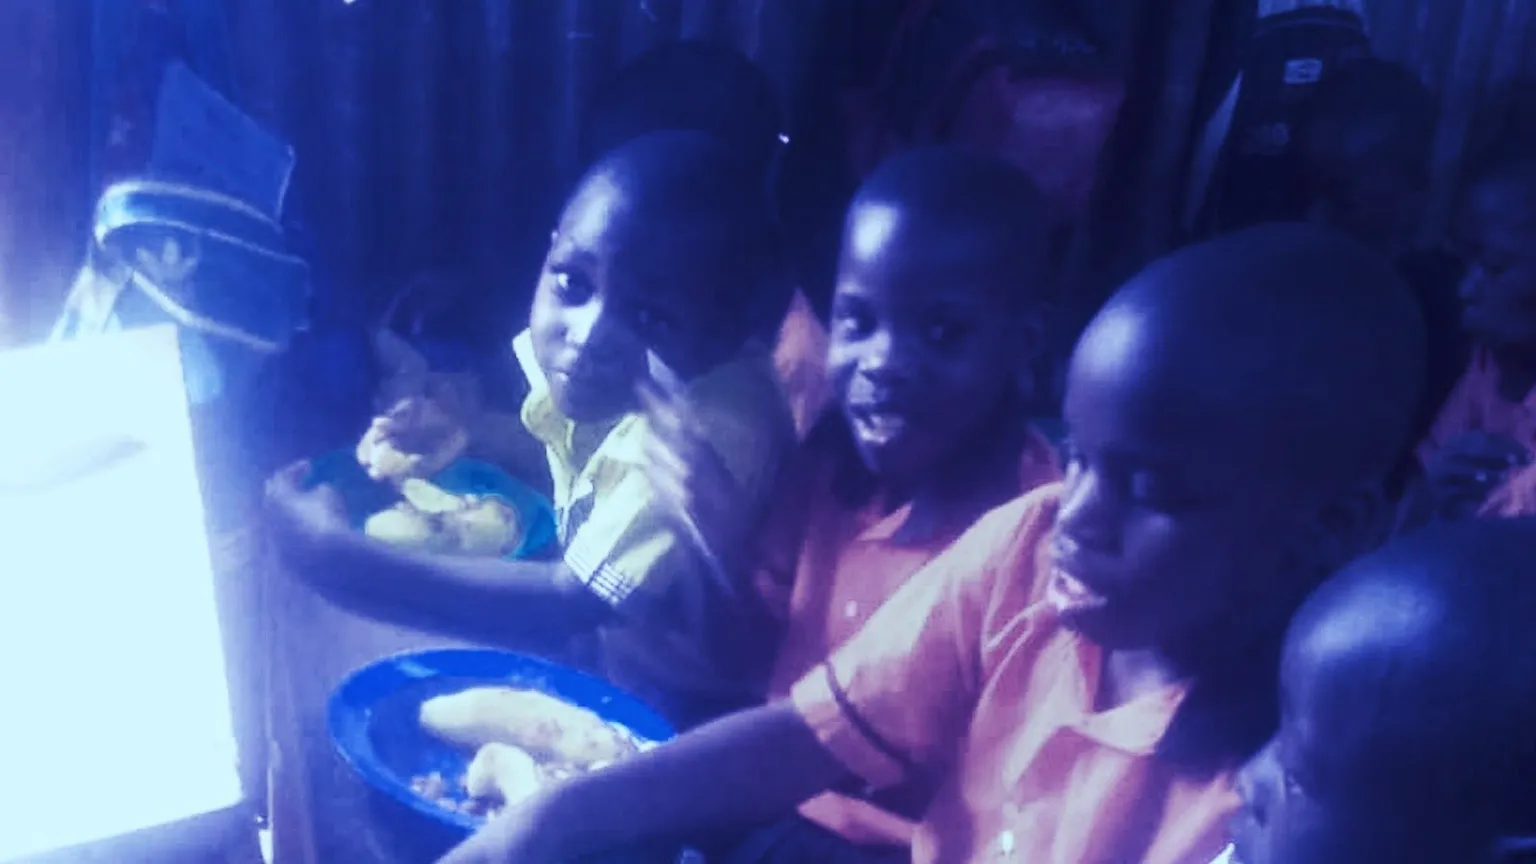 Kids from Vision Christian Schoo. Courtesy of Noah Kwagala, Director of Vision Christian School